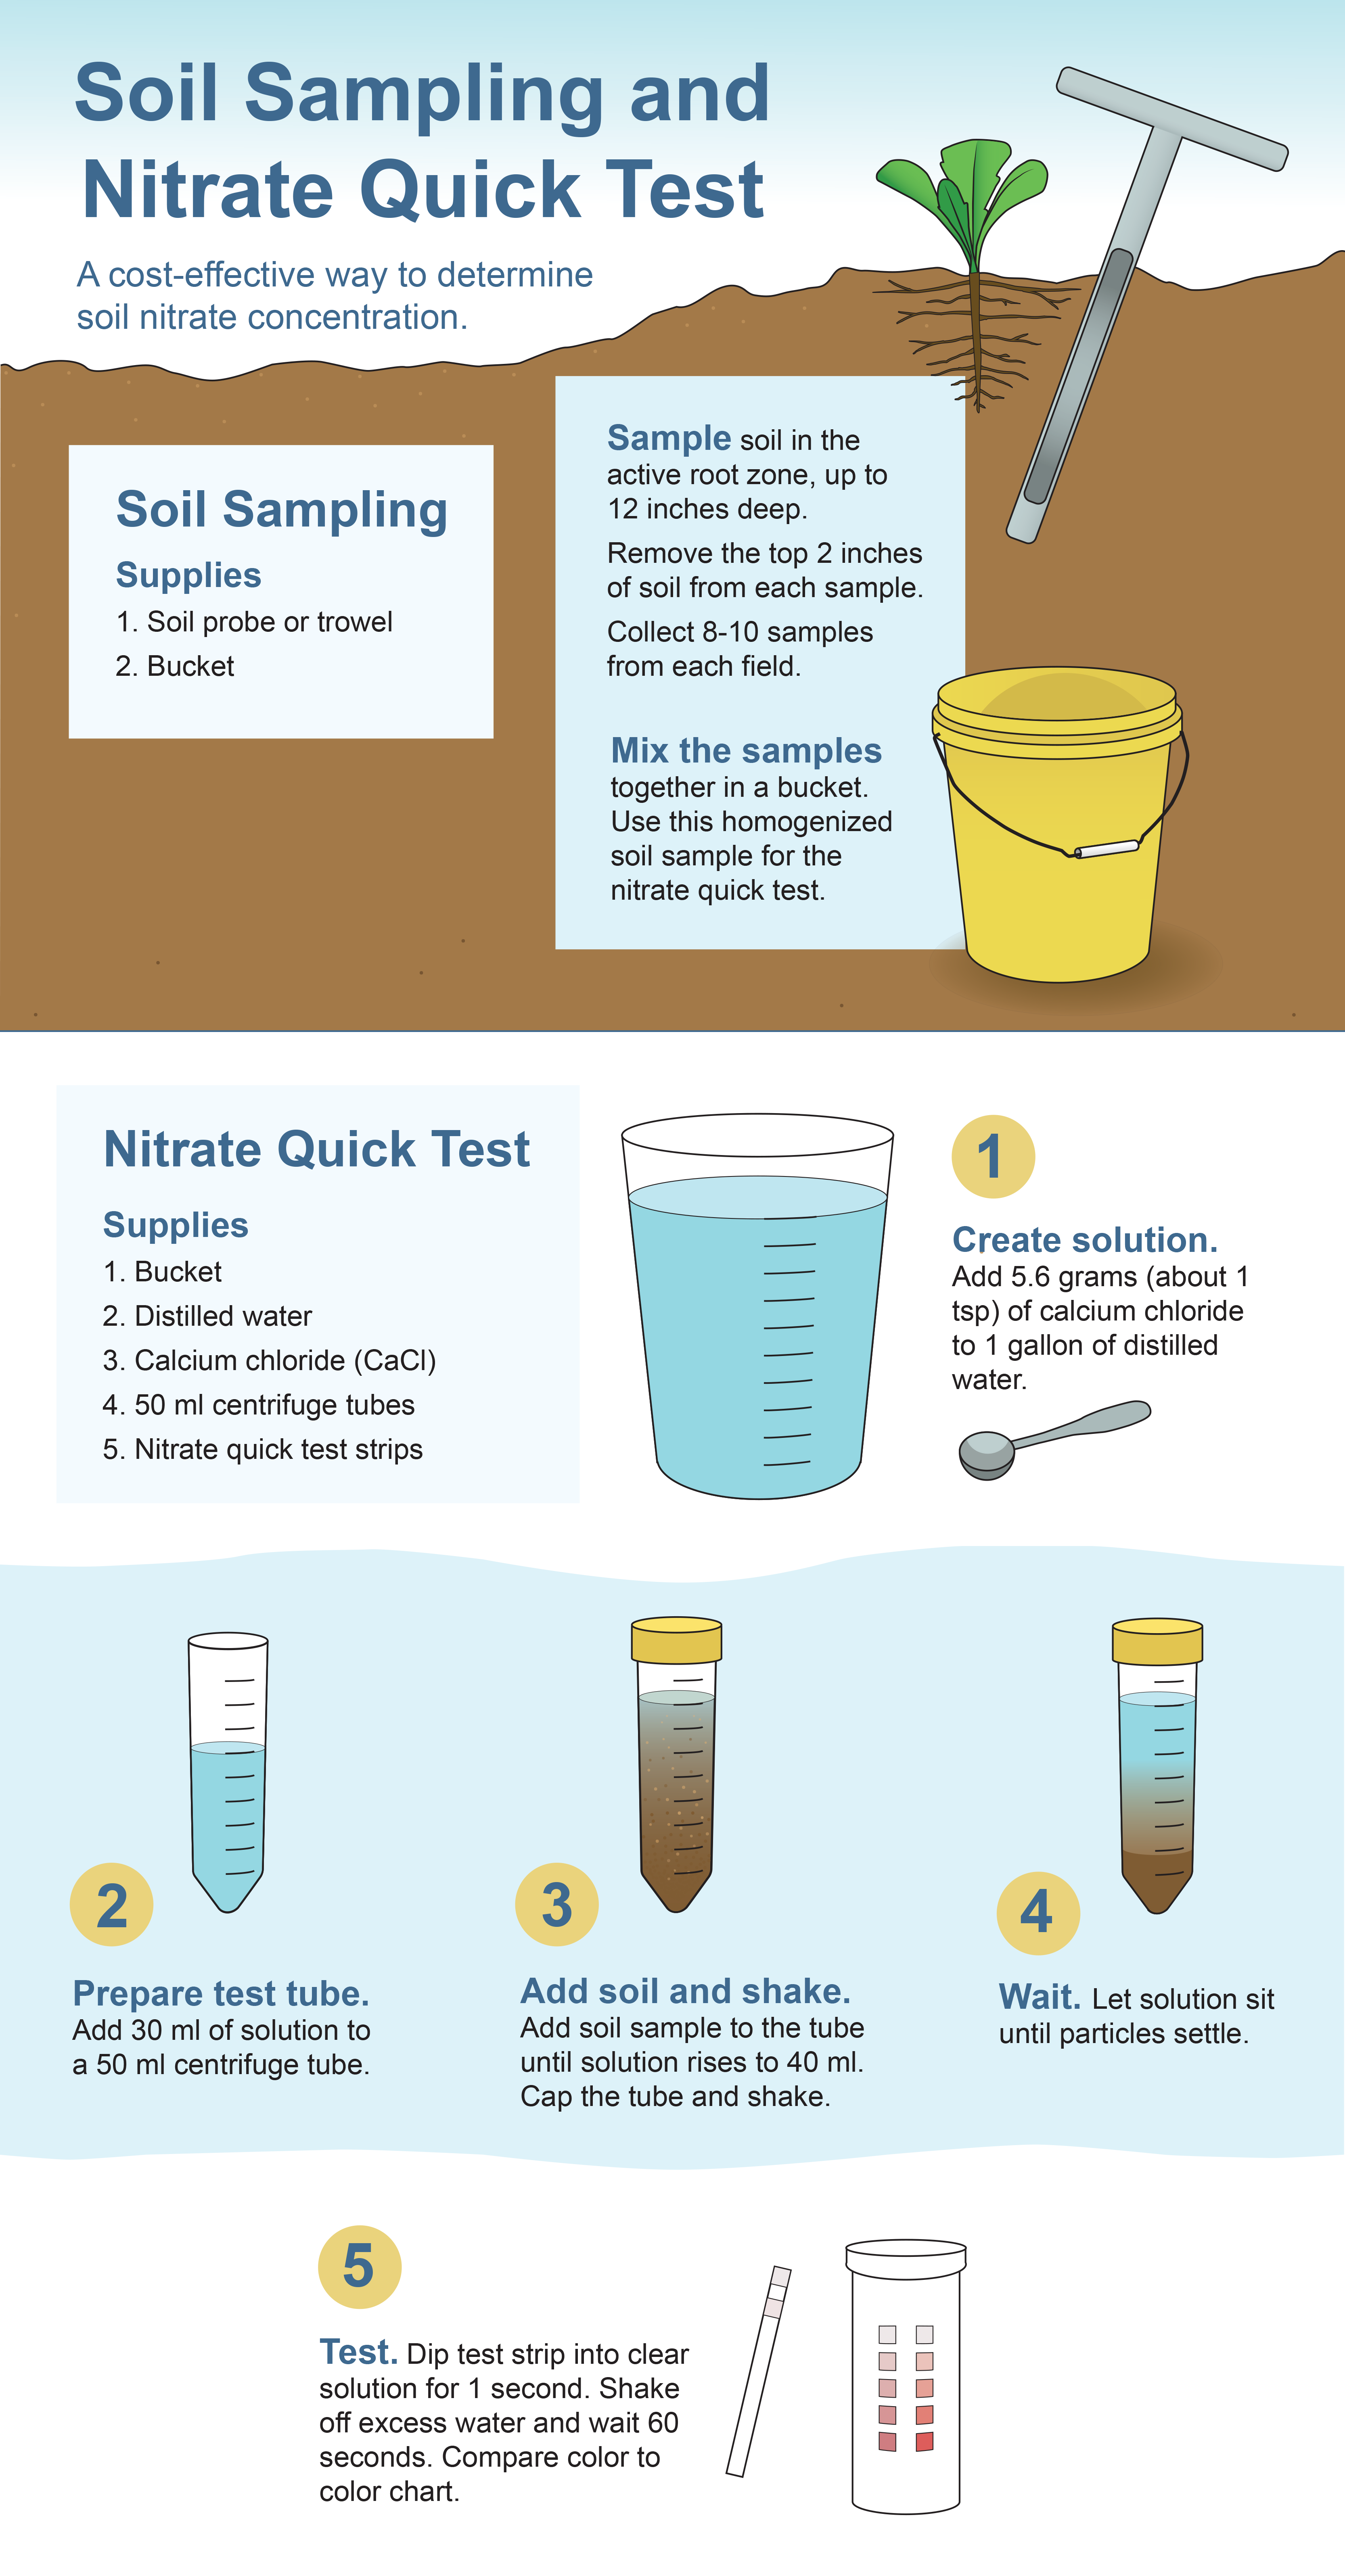 Illustrated directions for soil sampling and the nitrate quick test.